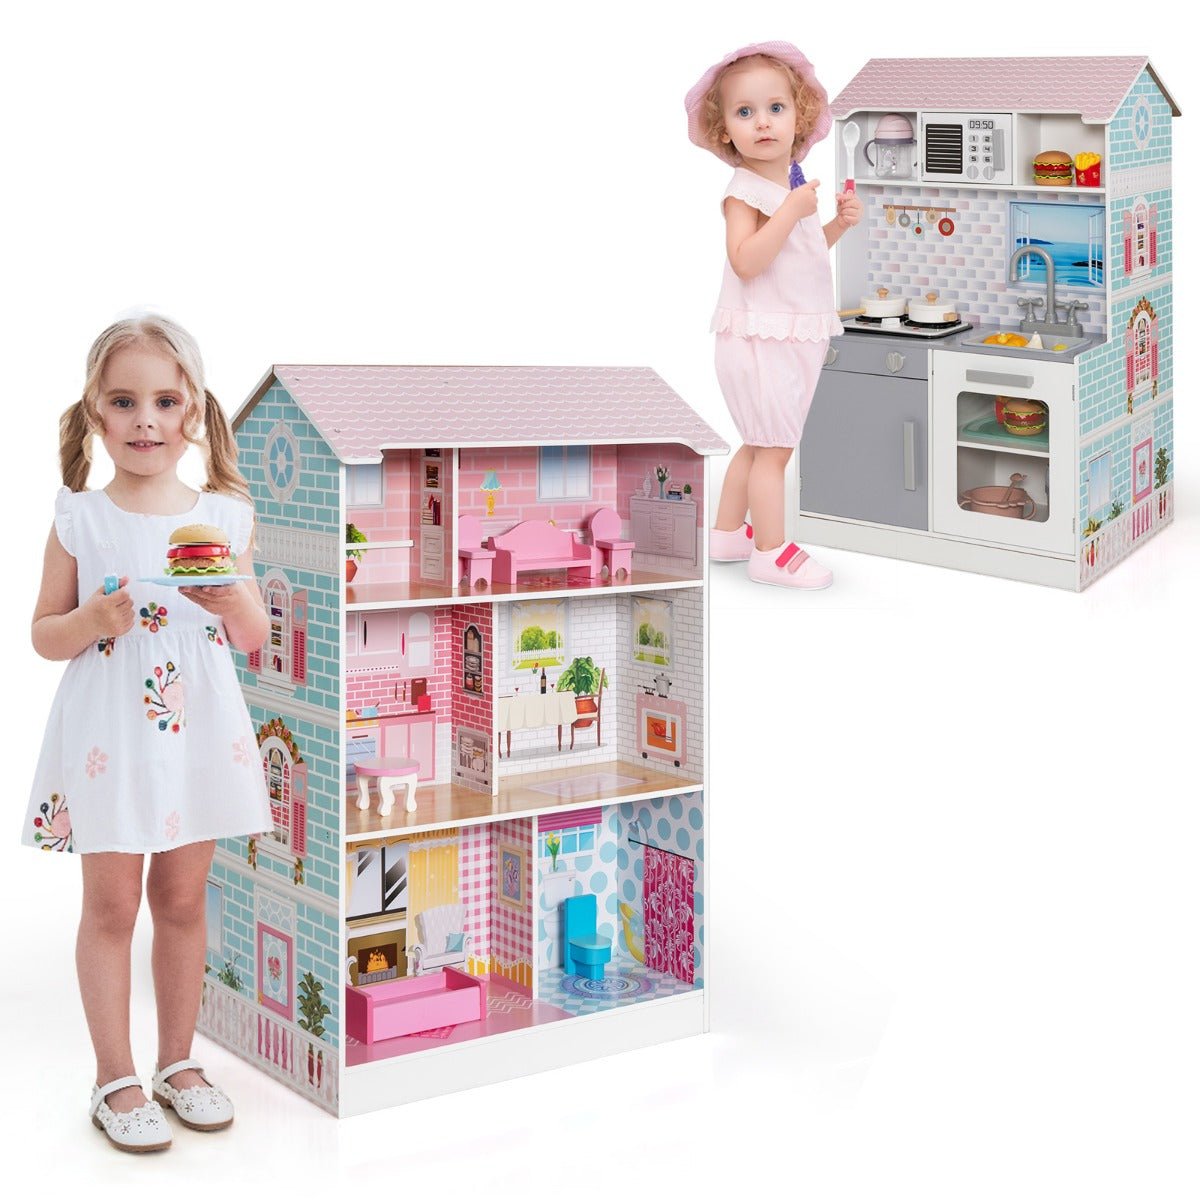 Playful Adventure Awaits: 2 in 1 Wooden Doll House and Play Kitchen with Accessories